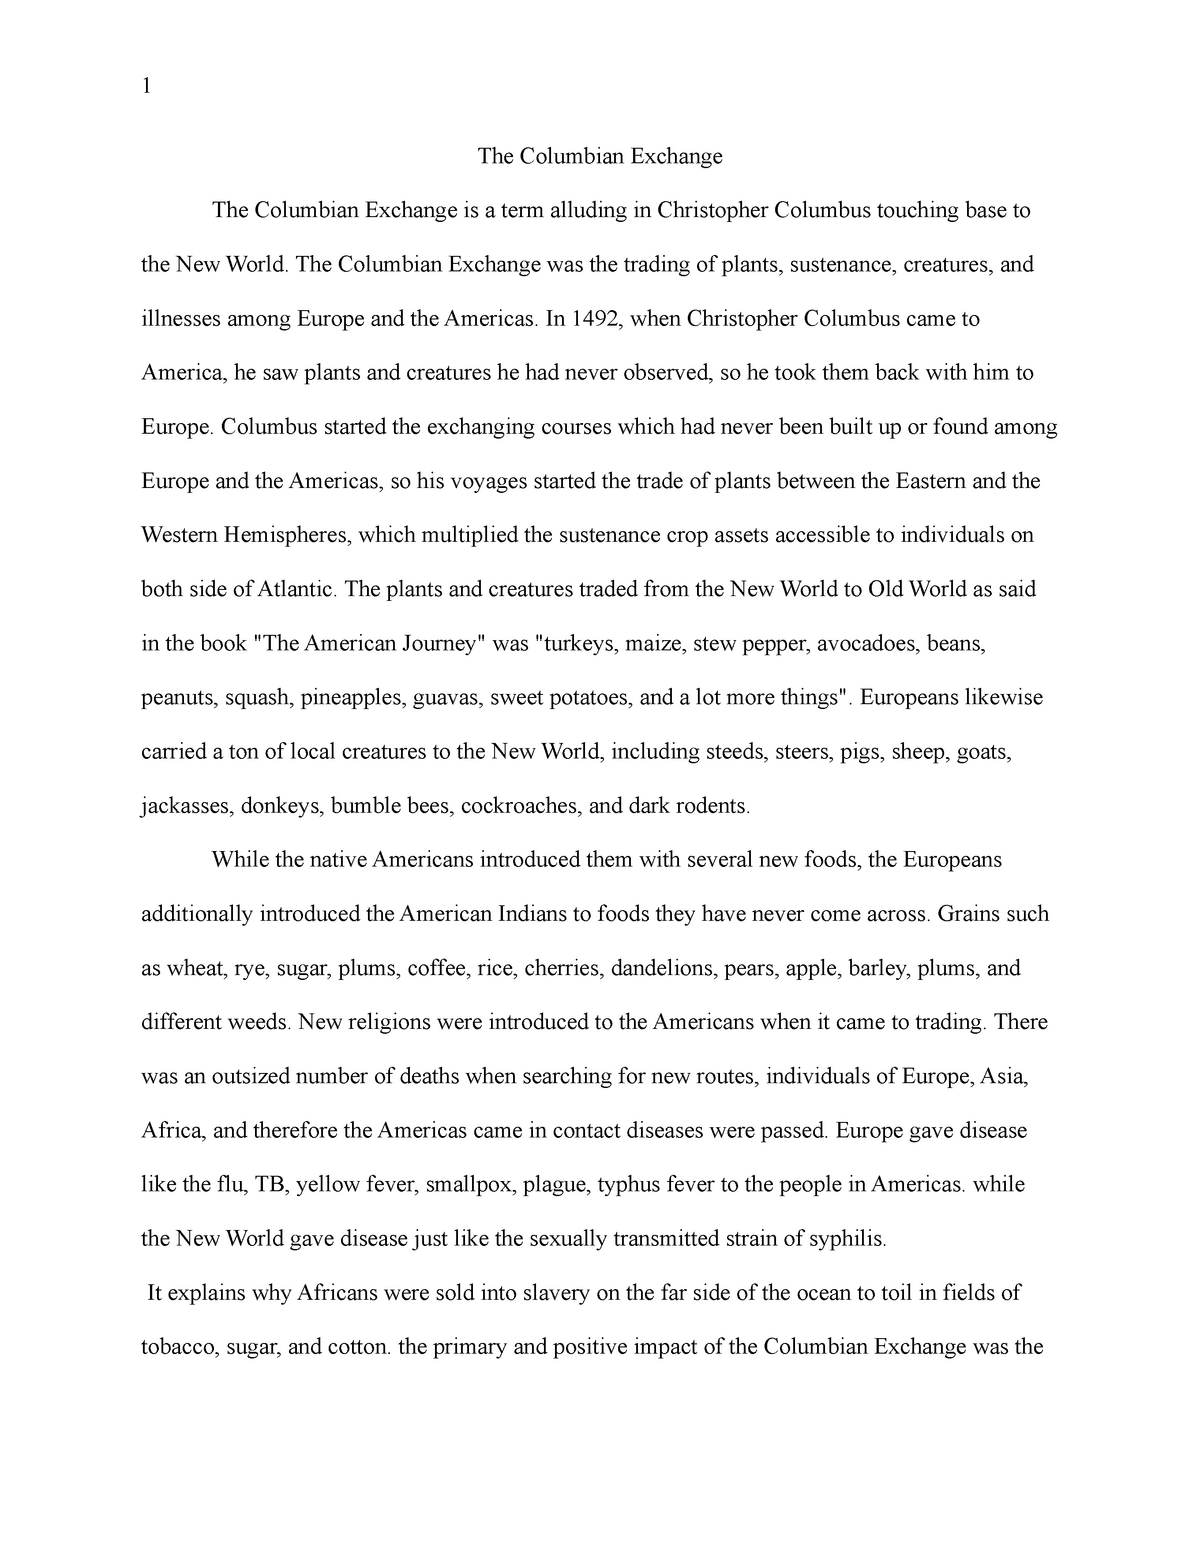 was the columbian exchange good or bad essay